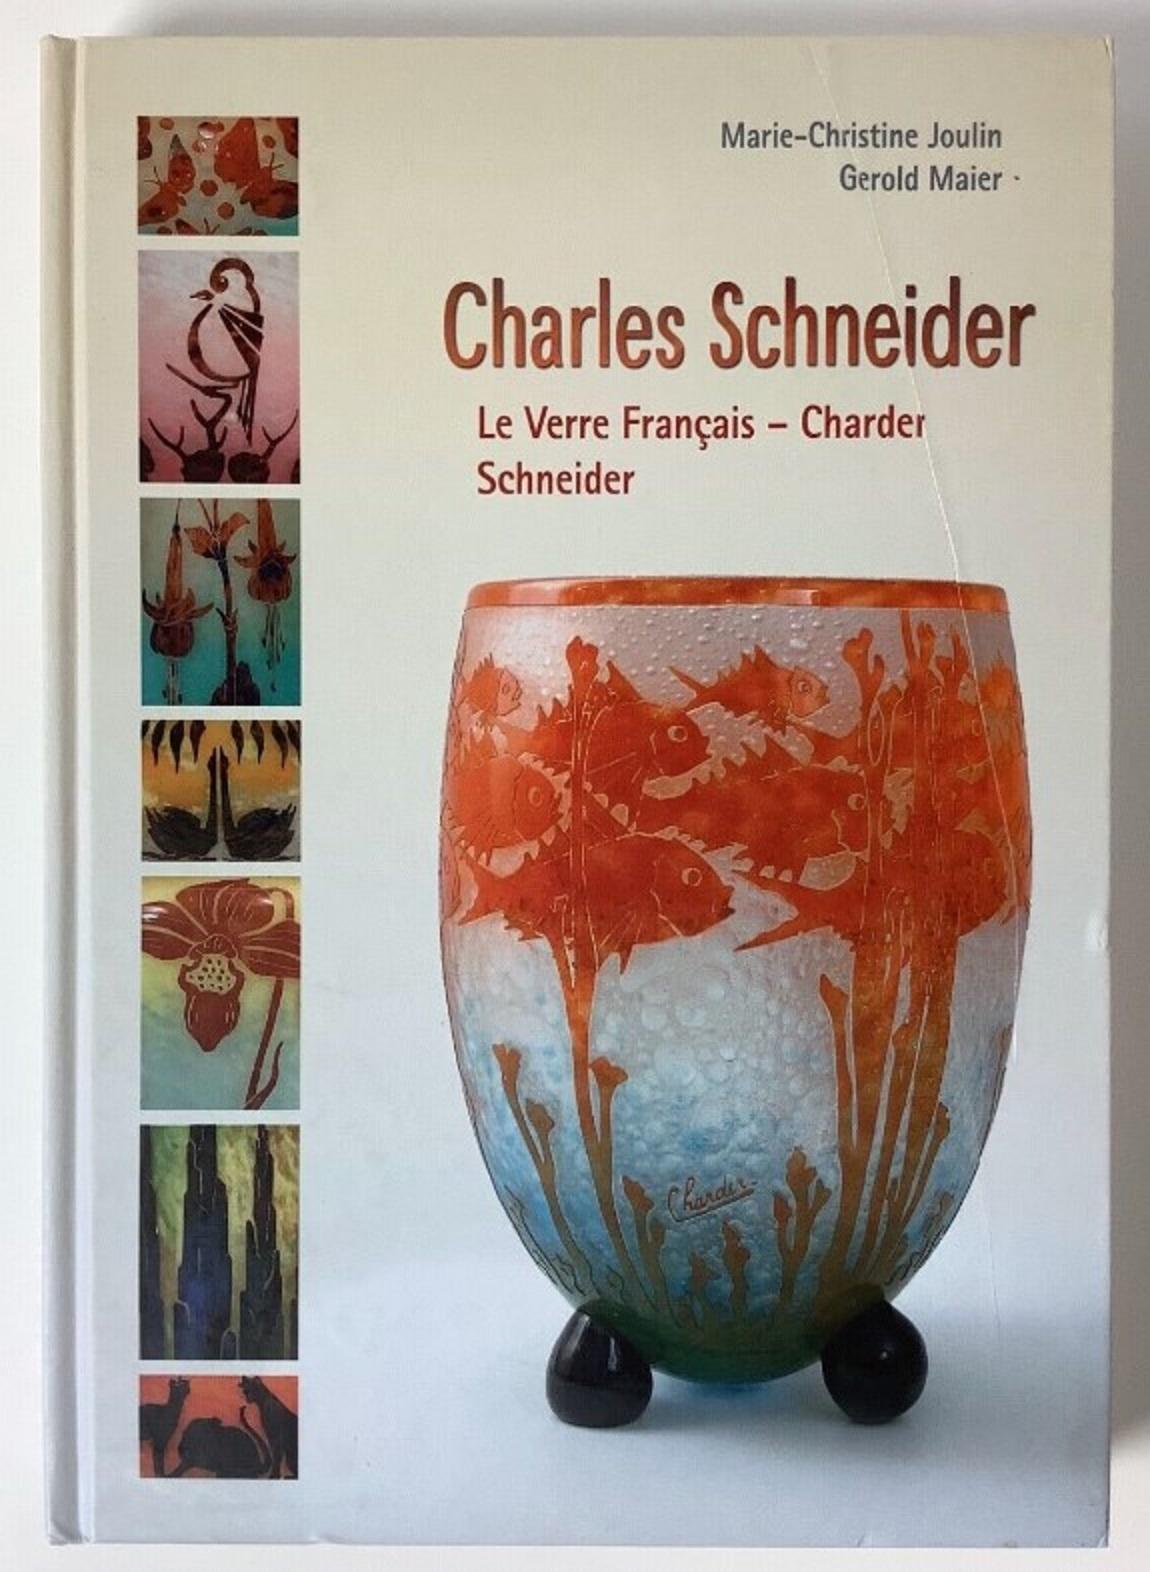 Monumental Vase Sign: Le Verre Francais ( Ombelles Flowers )
acid worked
Le Verre cameo glass was a separate line of art glass designed by Charles Schneider. Its production was made at the same time as the Schneider designed glasses 1918 –1933. But